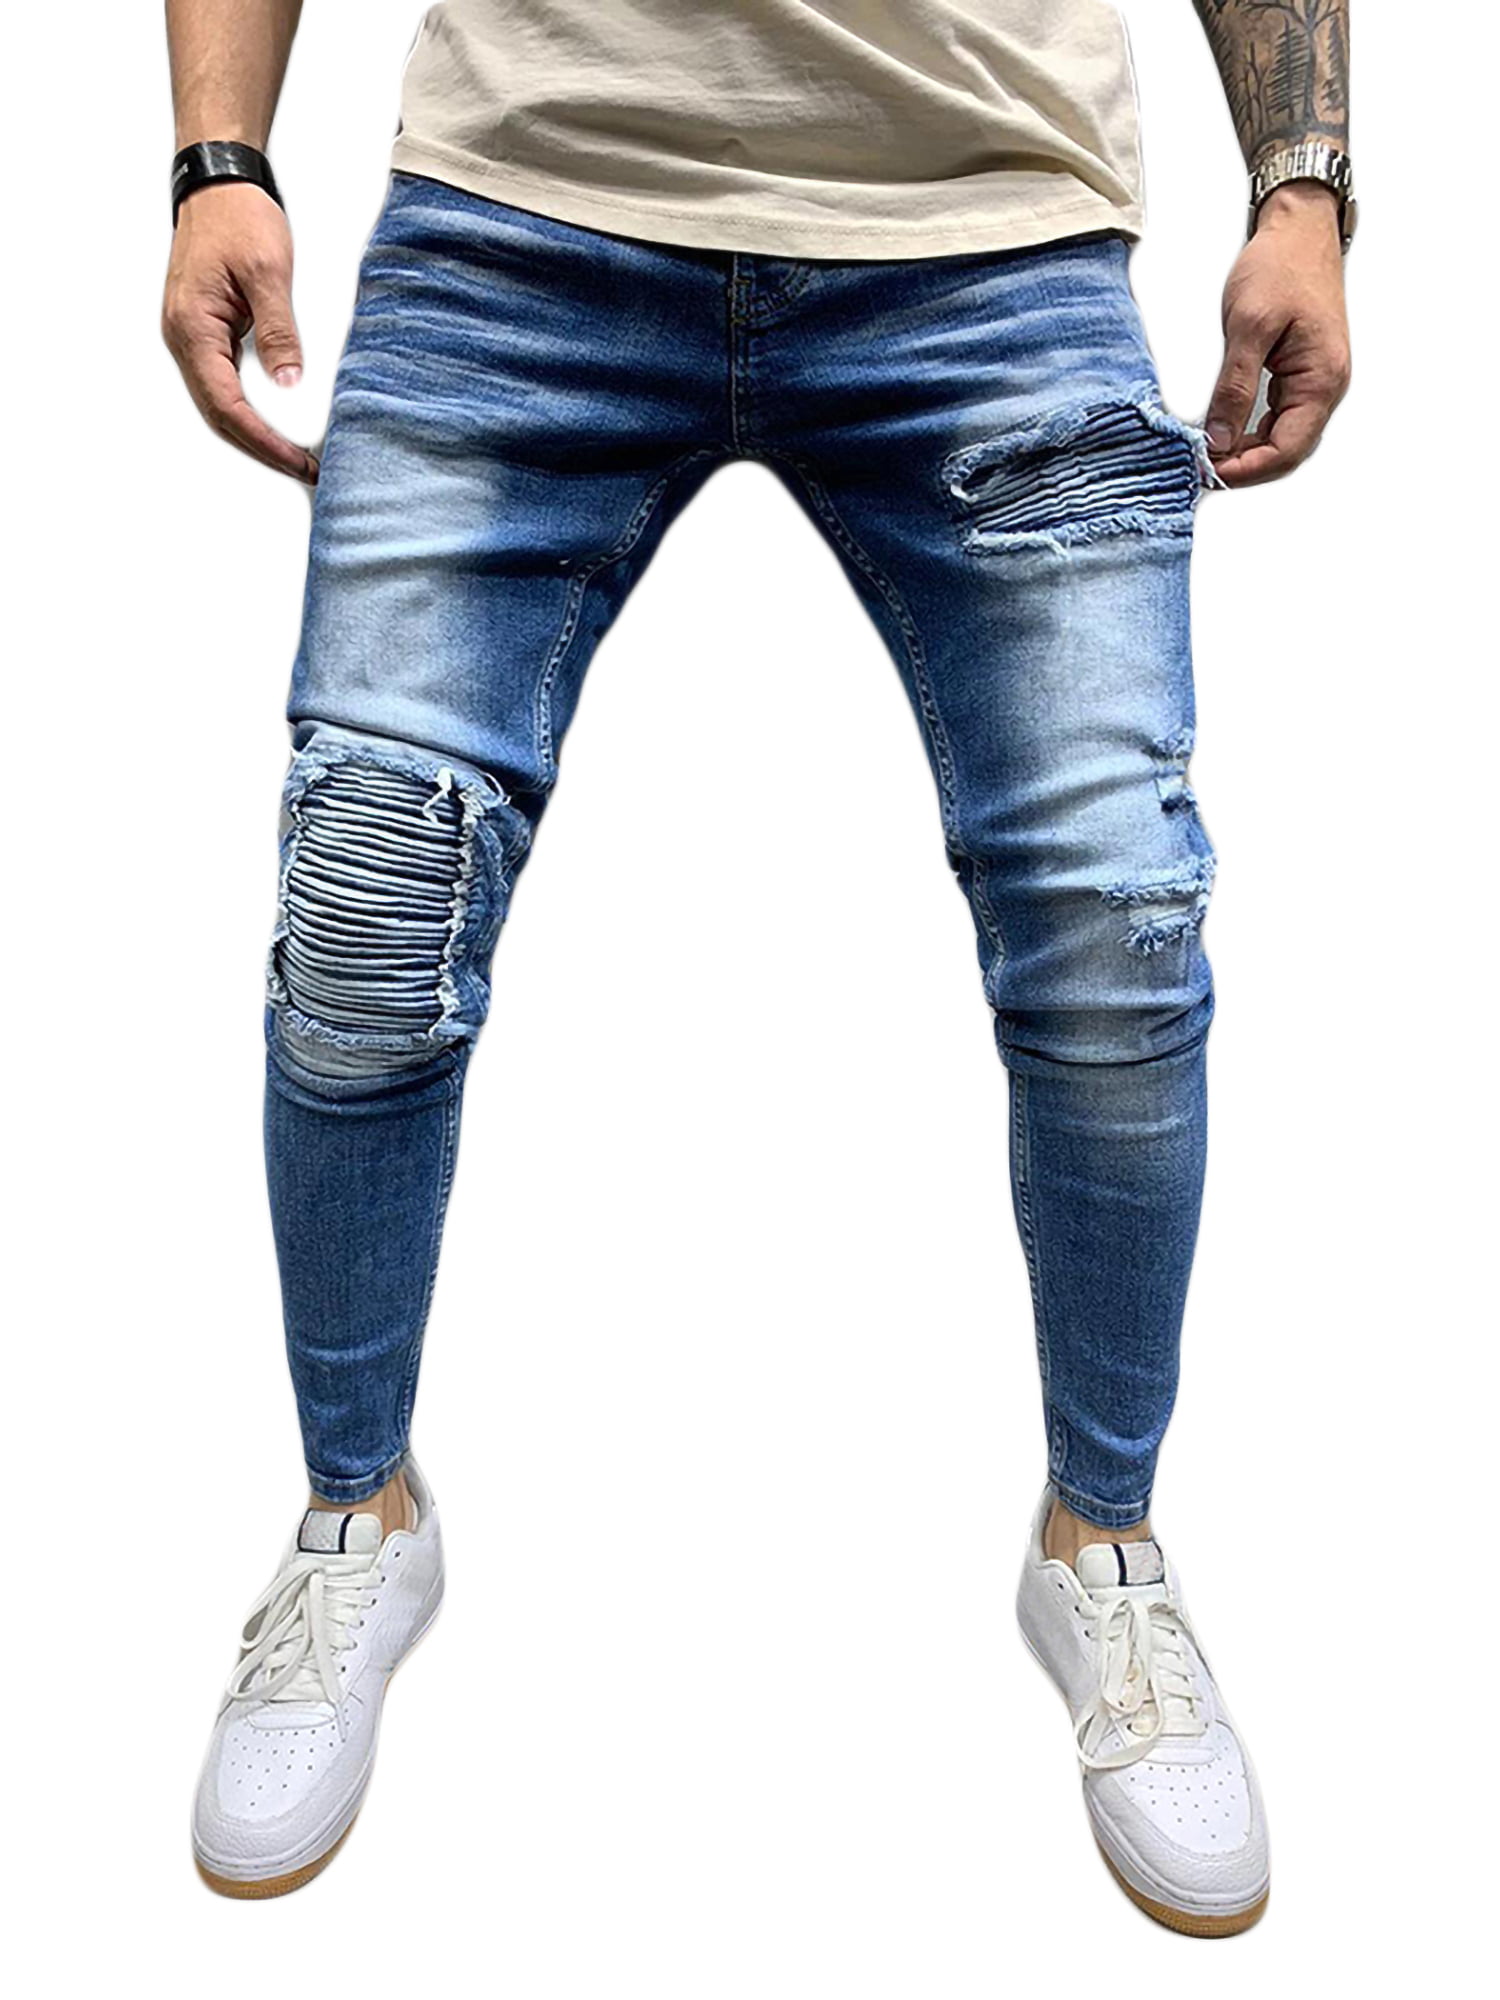 Kehen Mens Skinny Ripped Distressed Destroyed Straight Fit Denim Pants boy Straight Slim Fit Biker Jeans with Zip